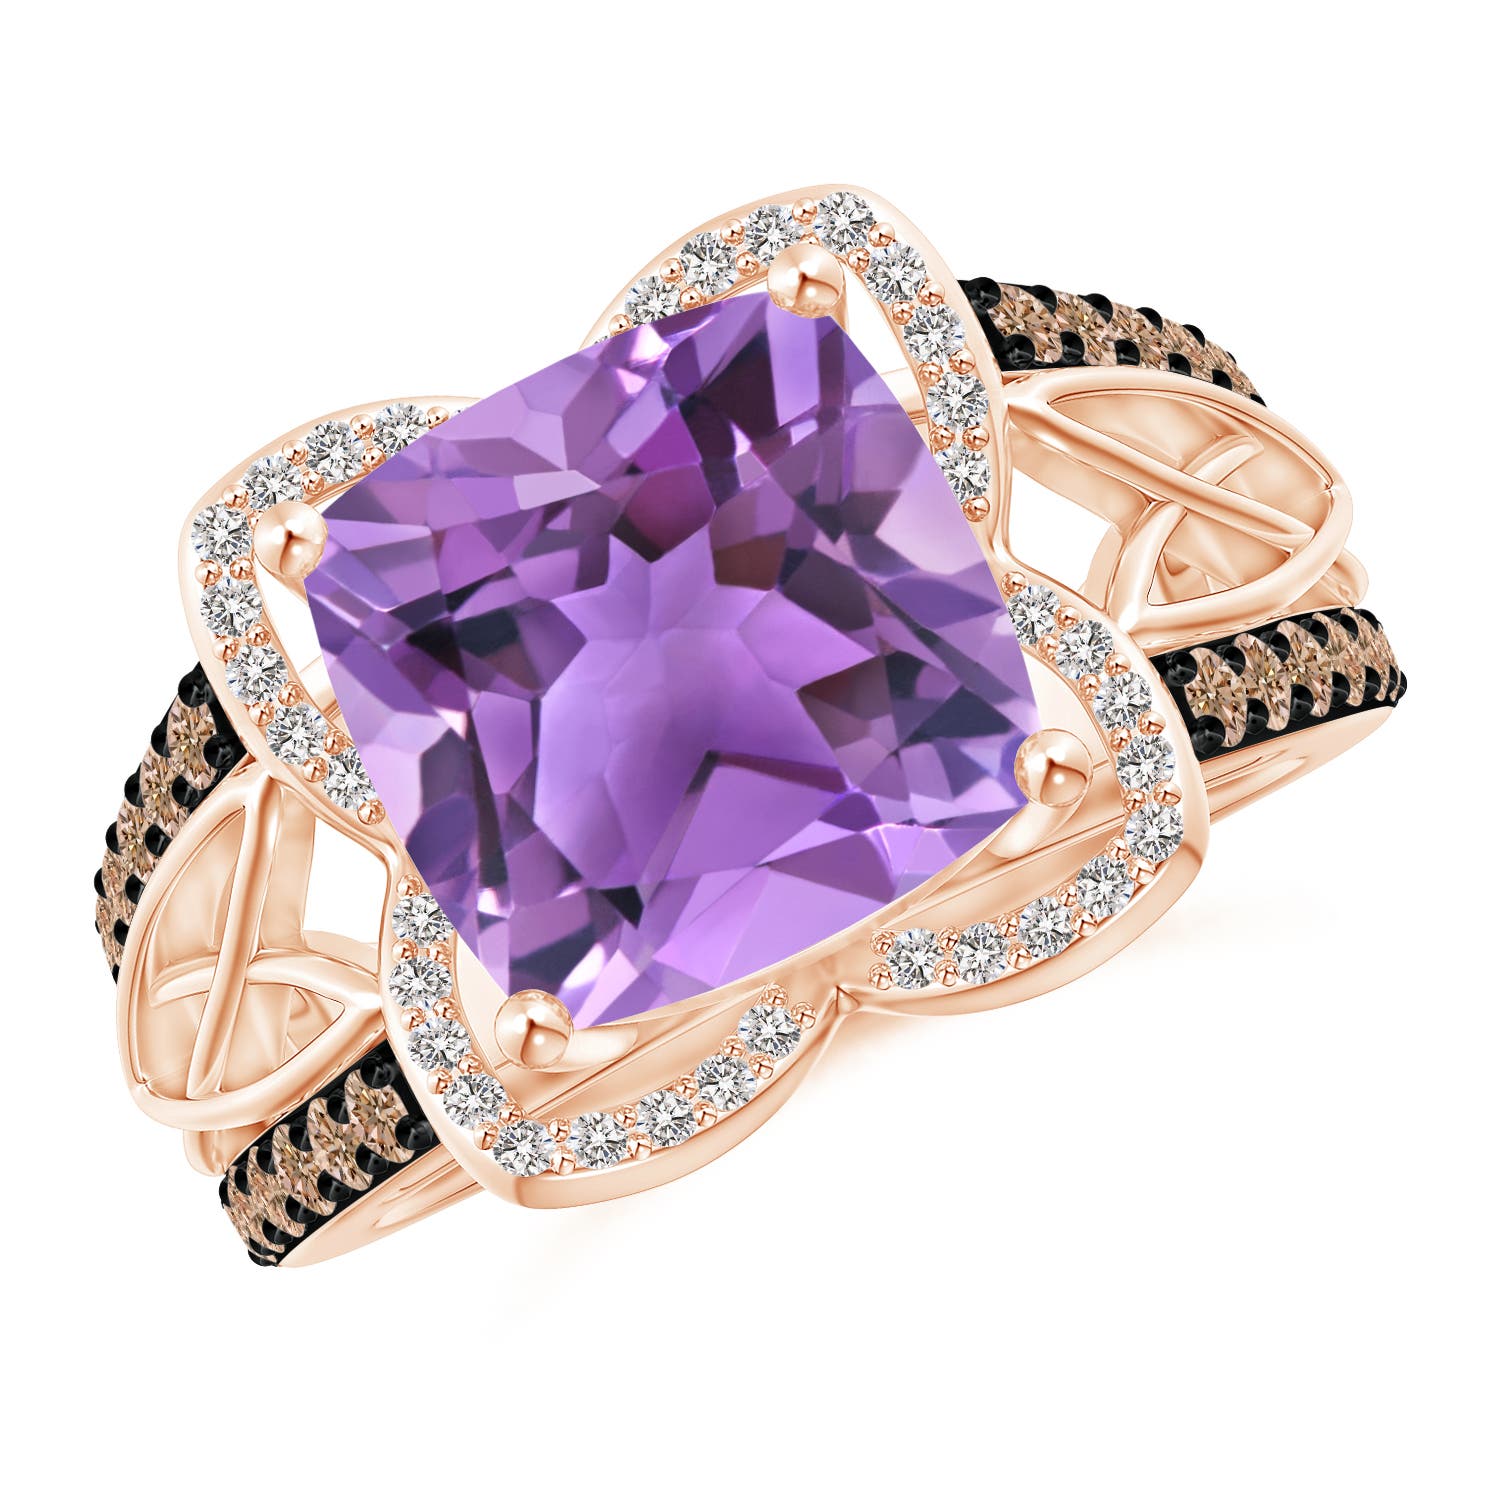 AA - Amethyst / 4.41 CT / 14 KT Rose Gold